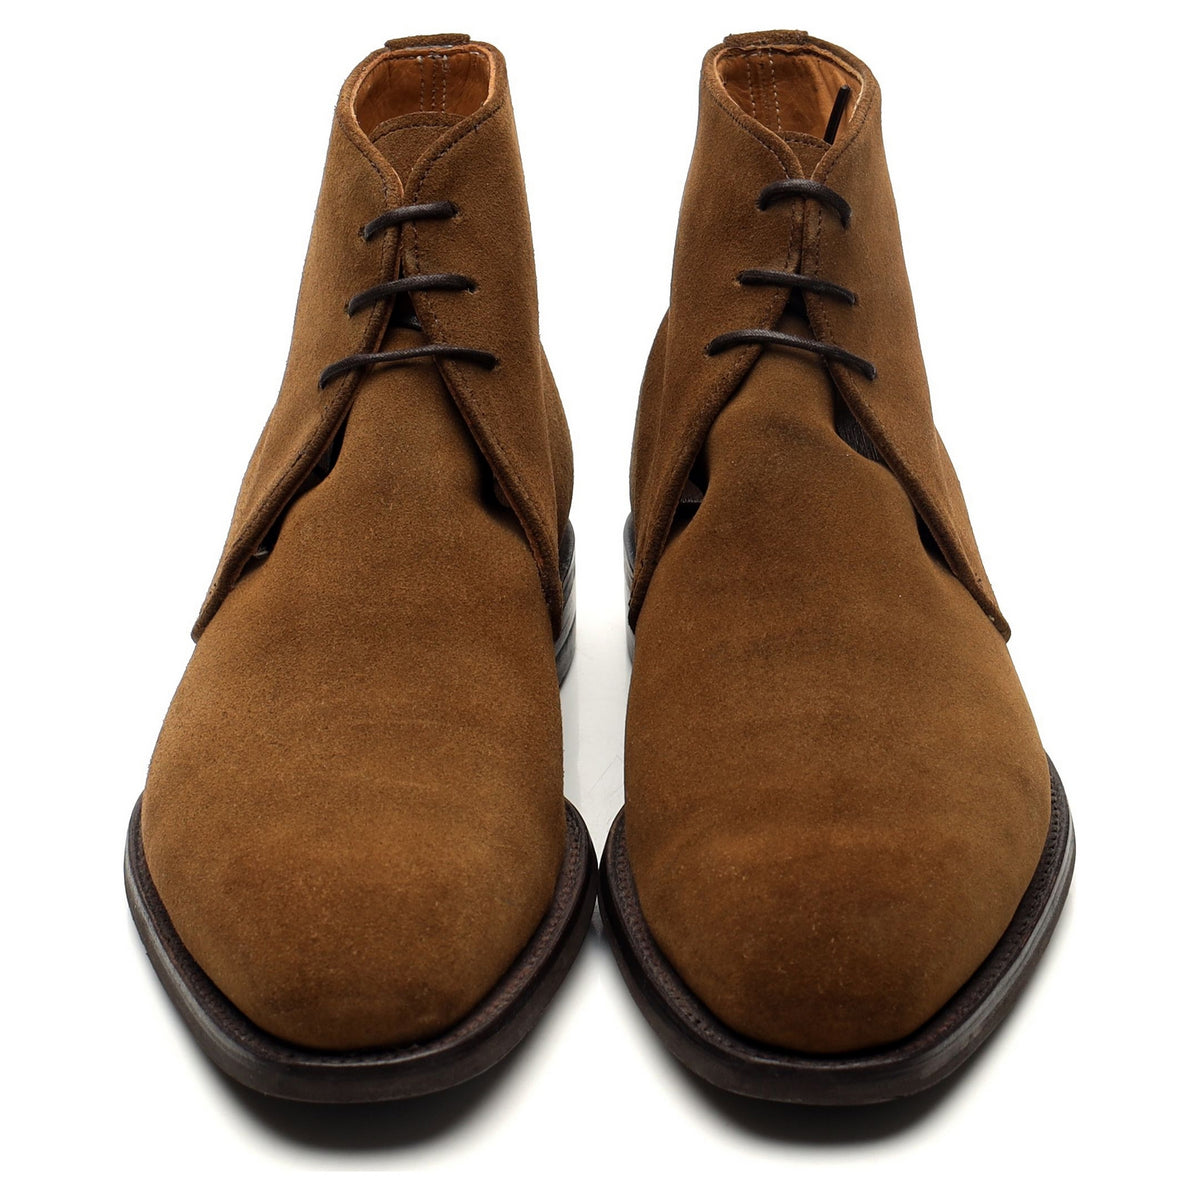 Sand Brown Suede Chukka Boots UK 6 F